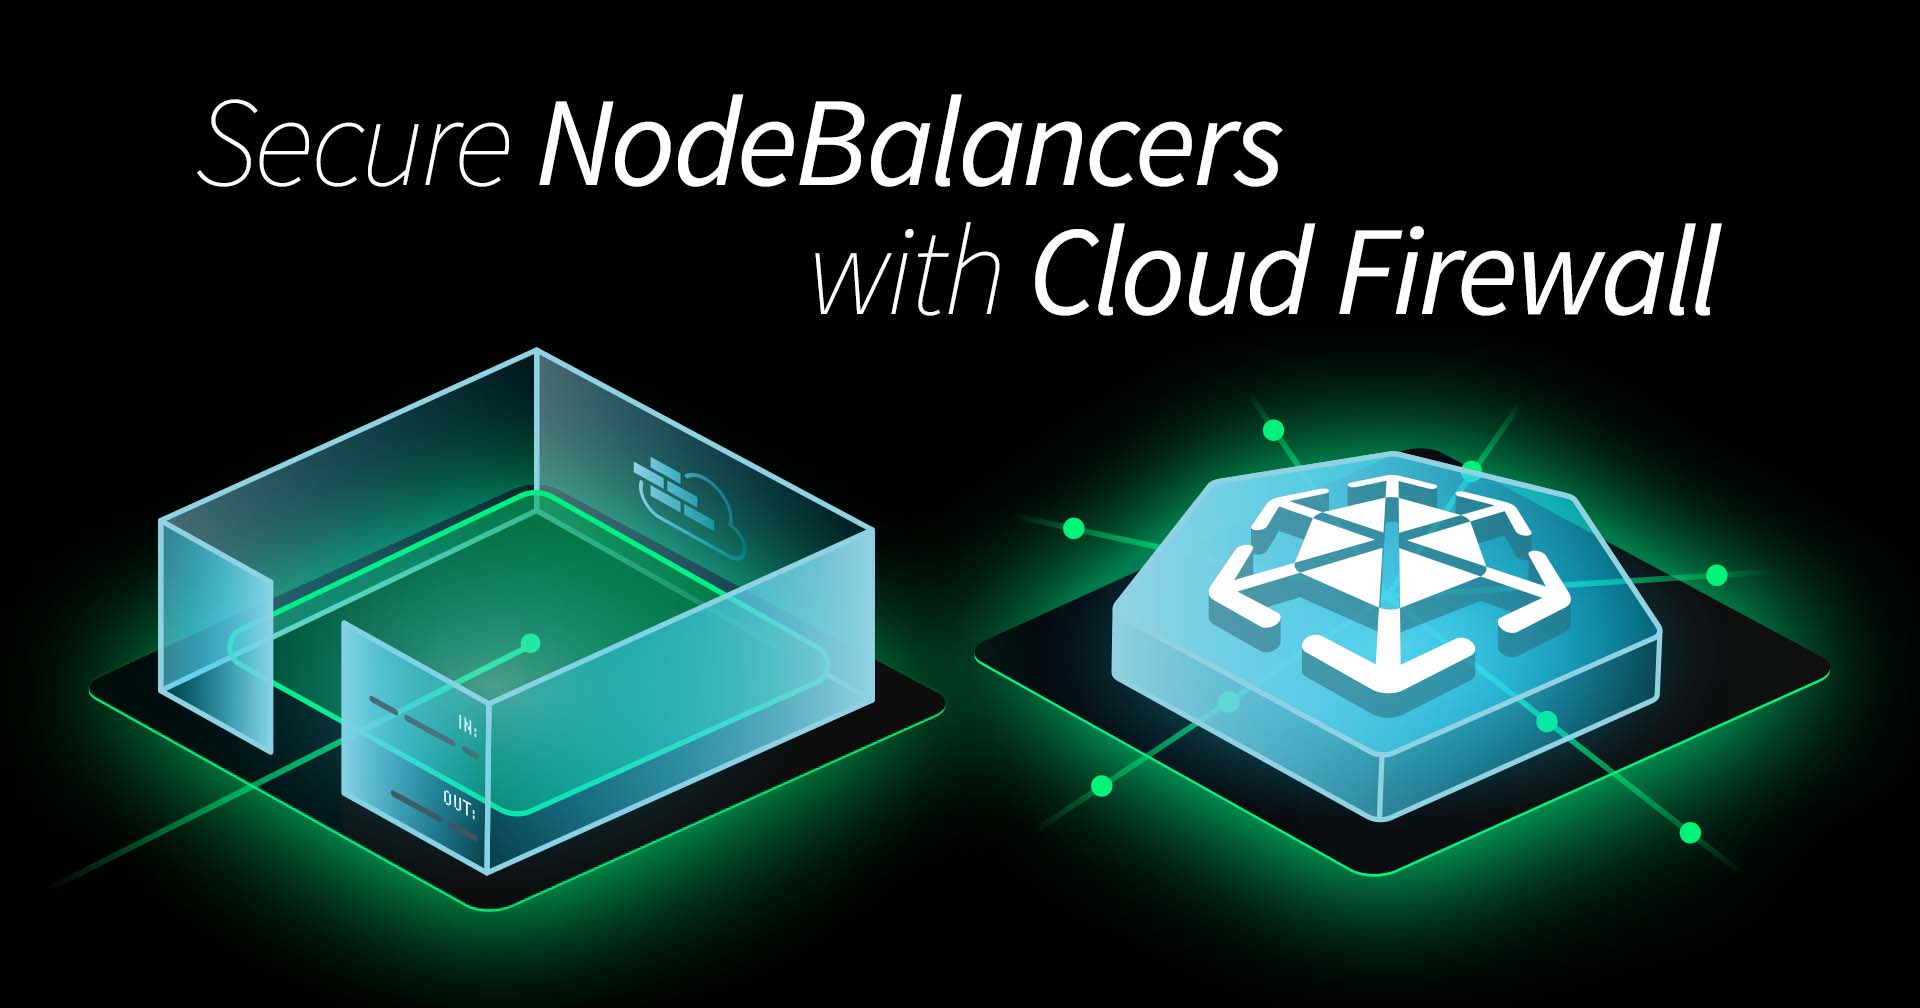 Secure NodeBalancers with Cloud Firewall, featured image.